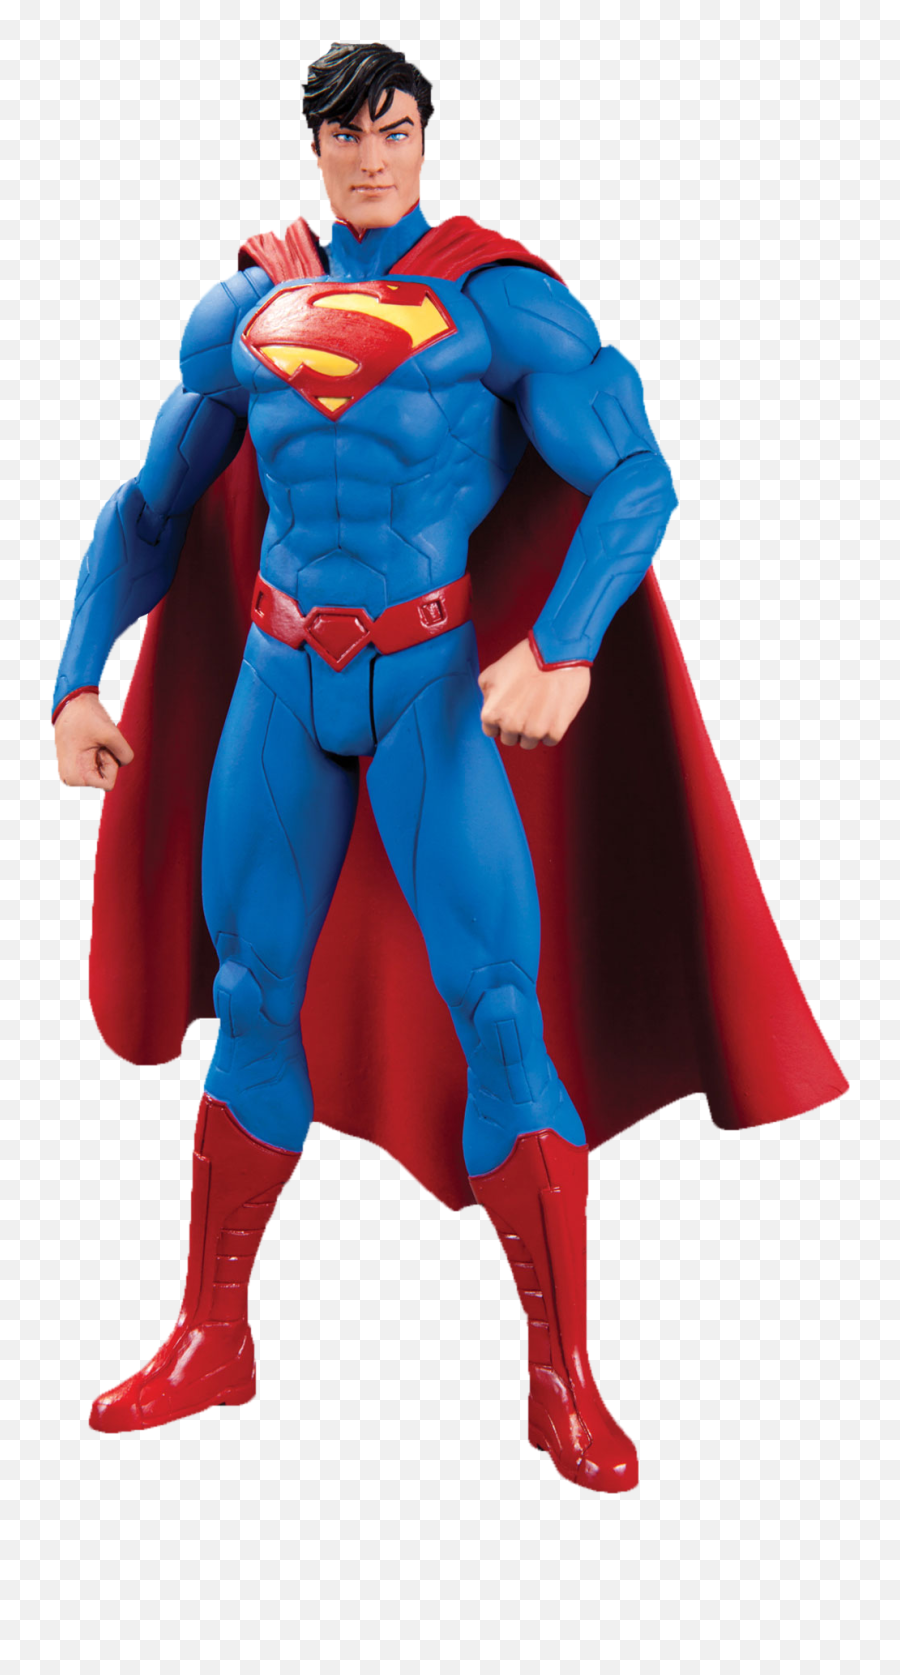 Superman Png - Superman New 52 Action Figure,Superman Flying Png